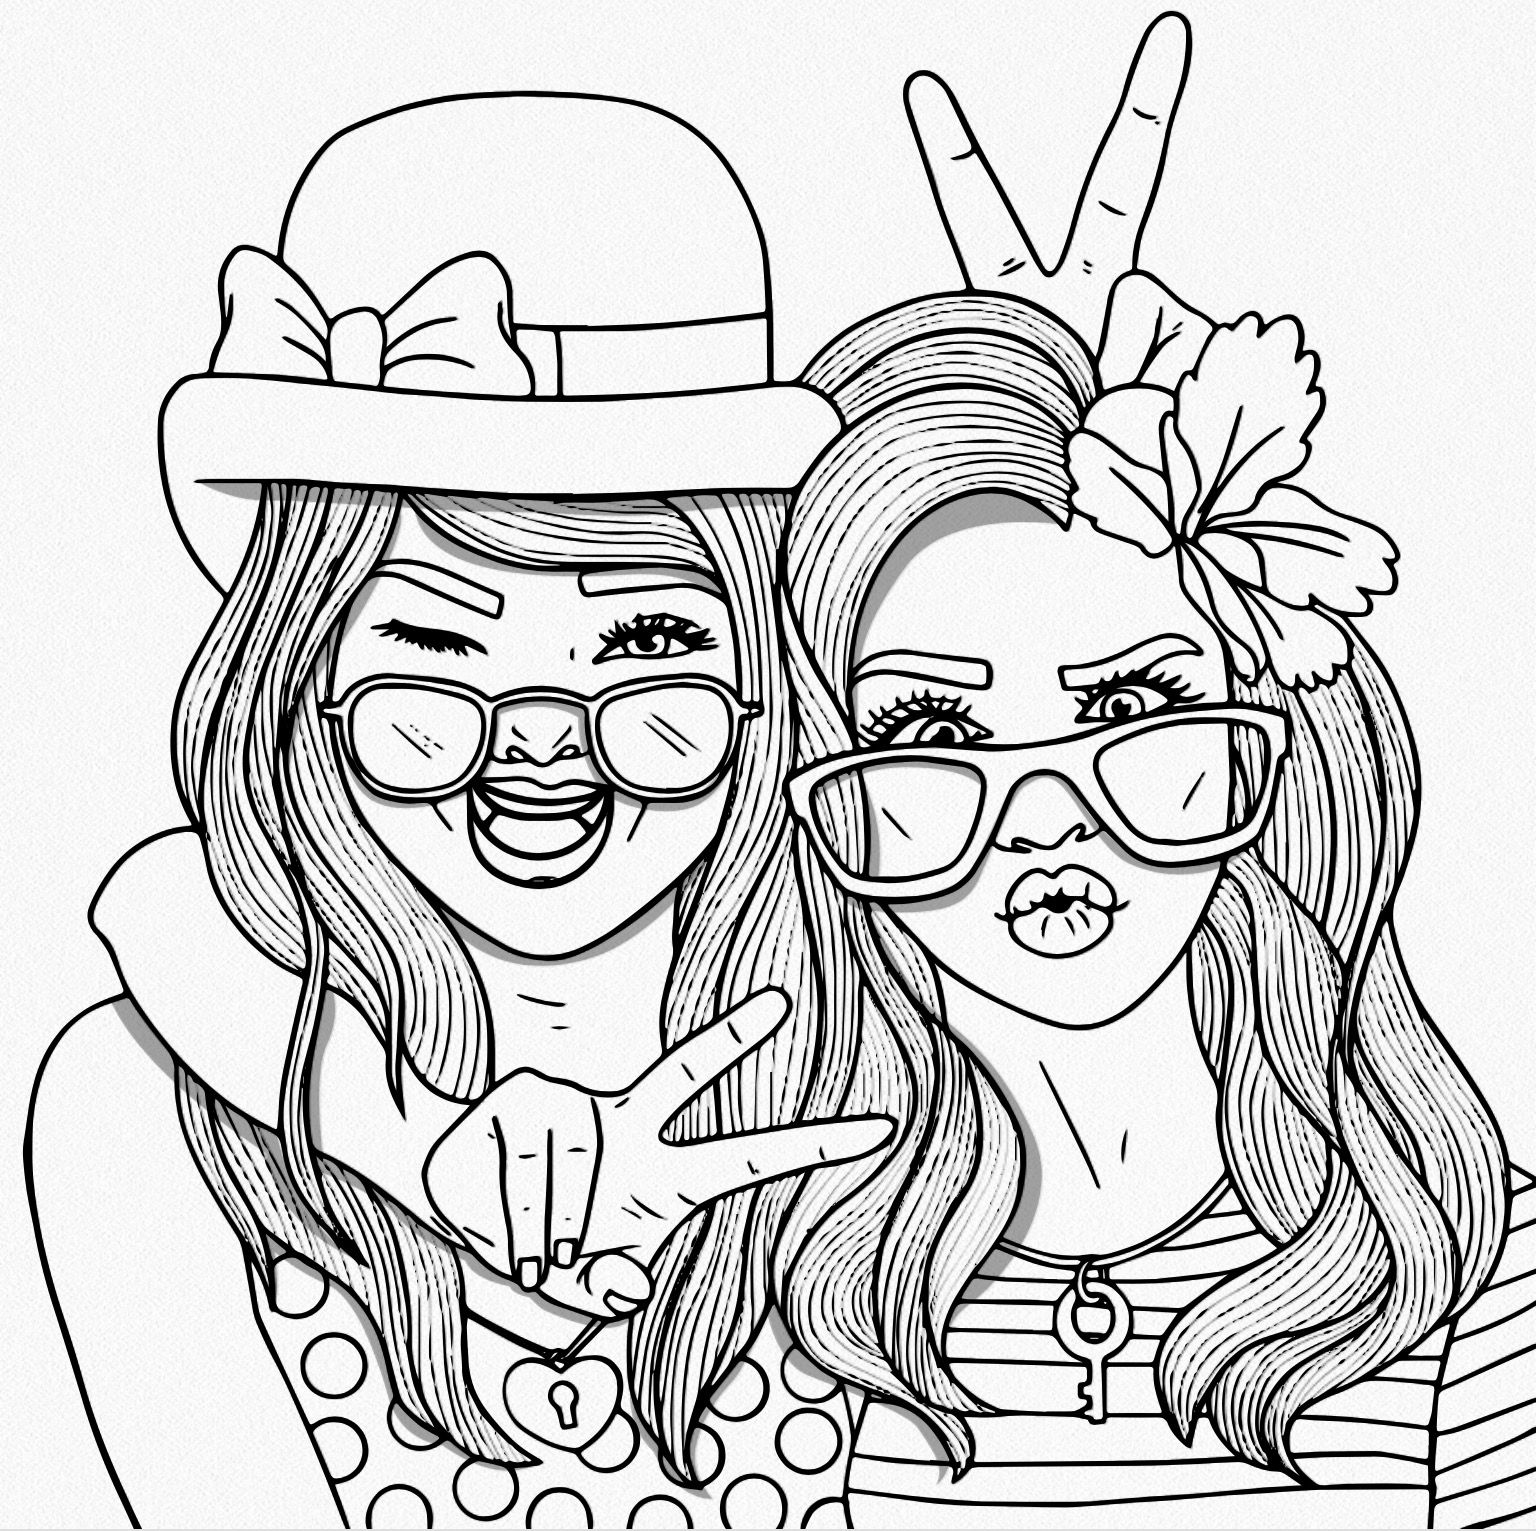 Bestie People Coloring Pages Cute Cool Sheets To Print Free Out For Adults  – Slavyanka